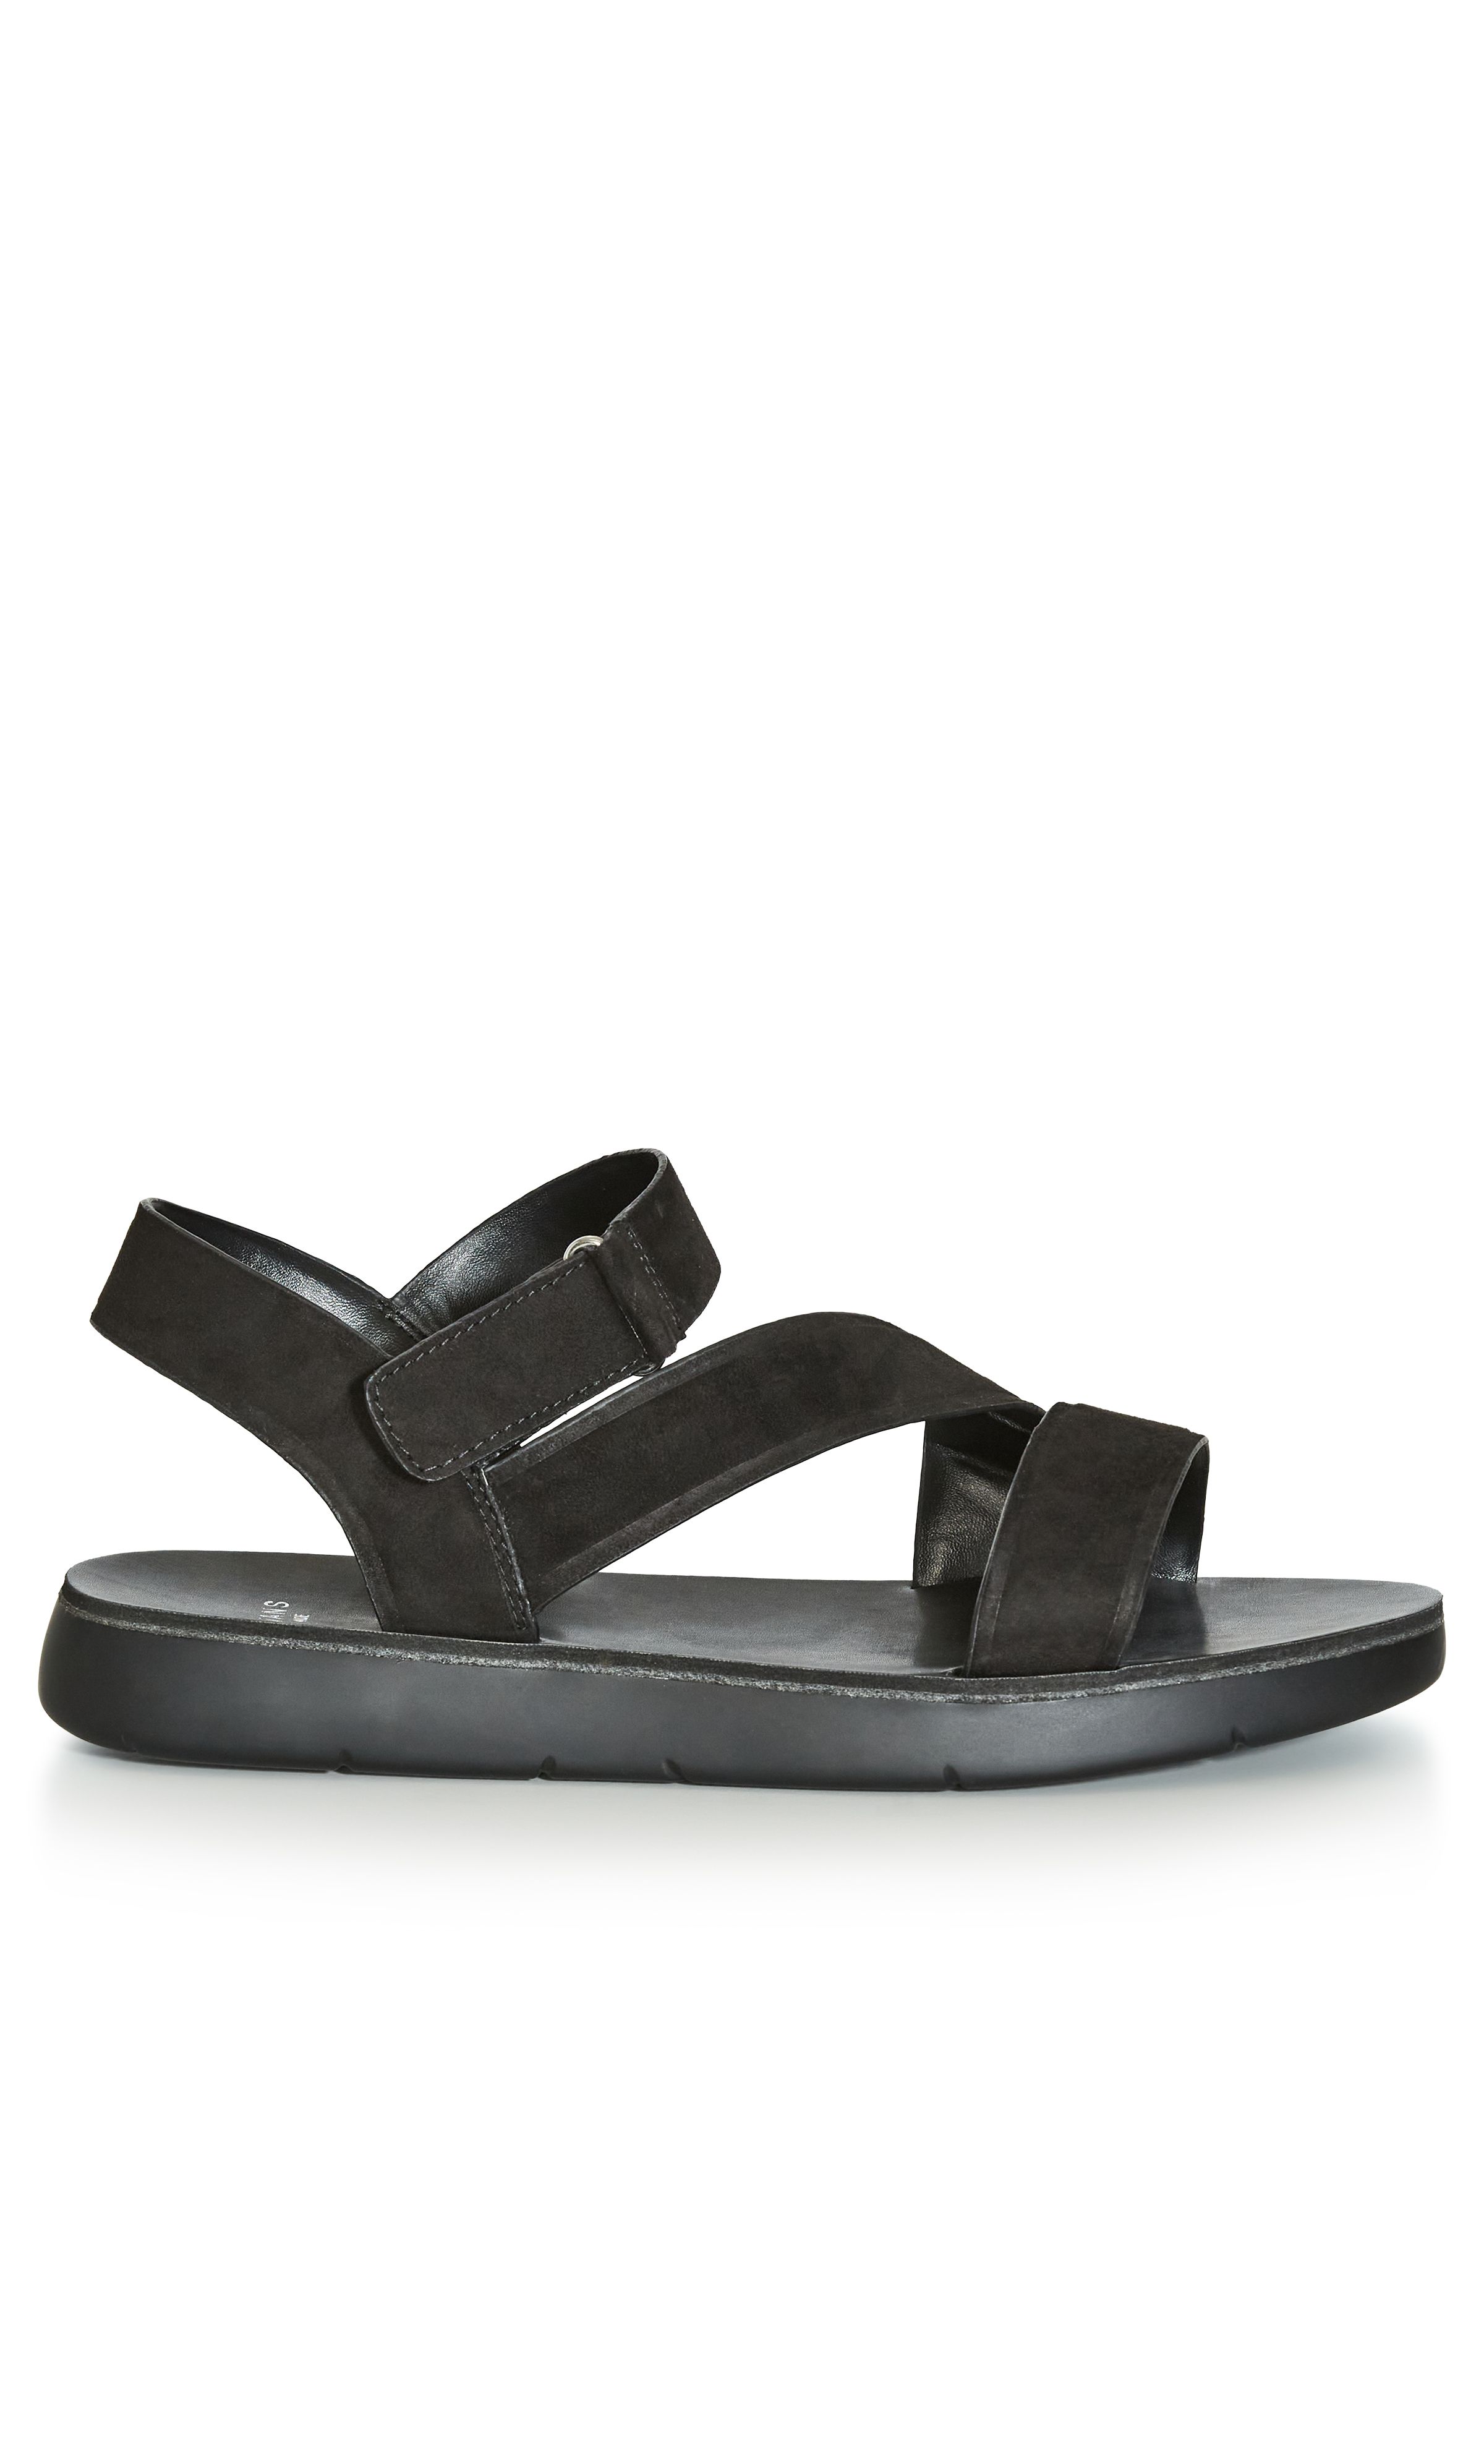 Being both seriously practical and totally trending, the Cross-Over Strap Sandal is a must-have pair for the new season! Find comfort in the chunky sole design of these everyday sandals, finished with thick straps and a faux-suede fabrication. Key Features Include: - Wide fit - Side velcro closure - Flat sole - Faux-suede fabrication Team with boyfriend jeans and a breezy cami for simple summer style.